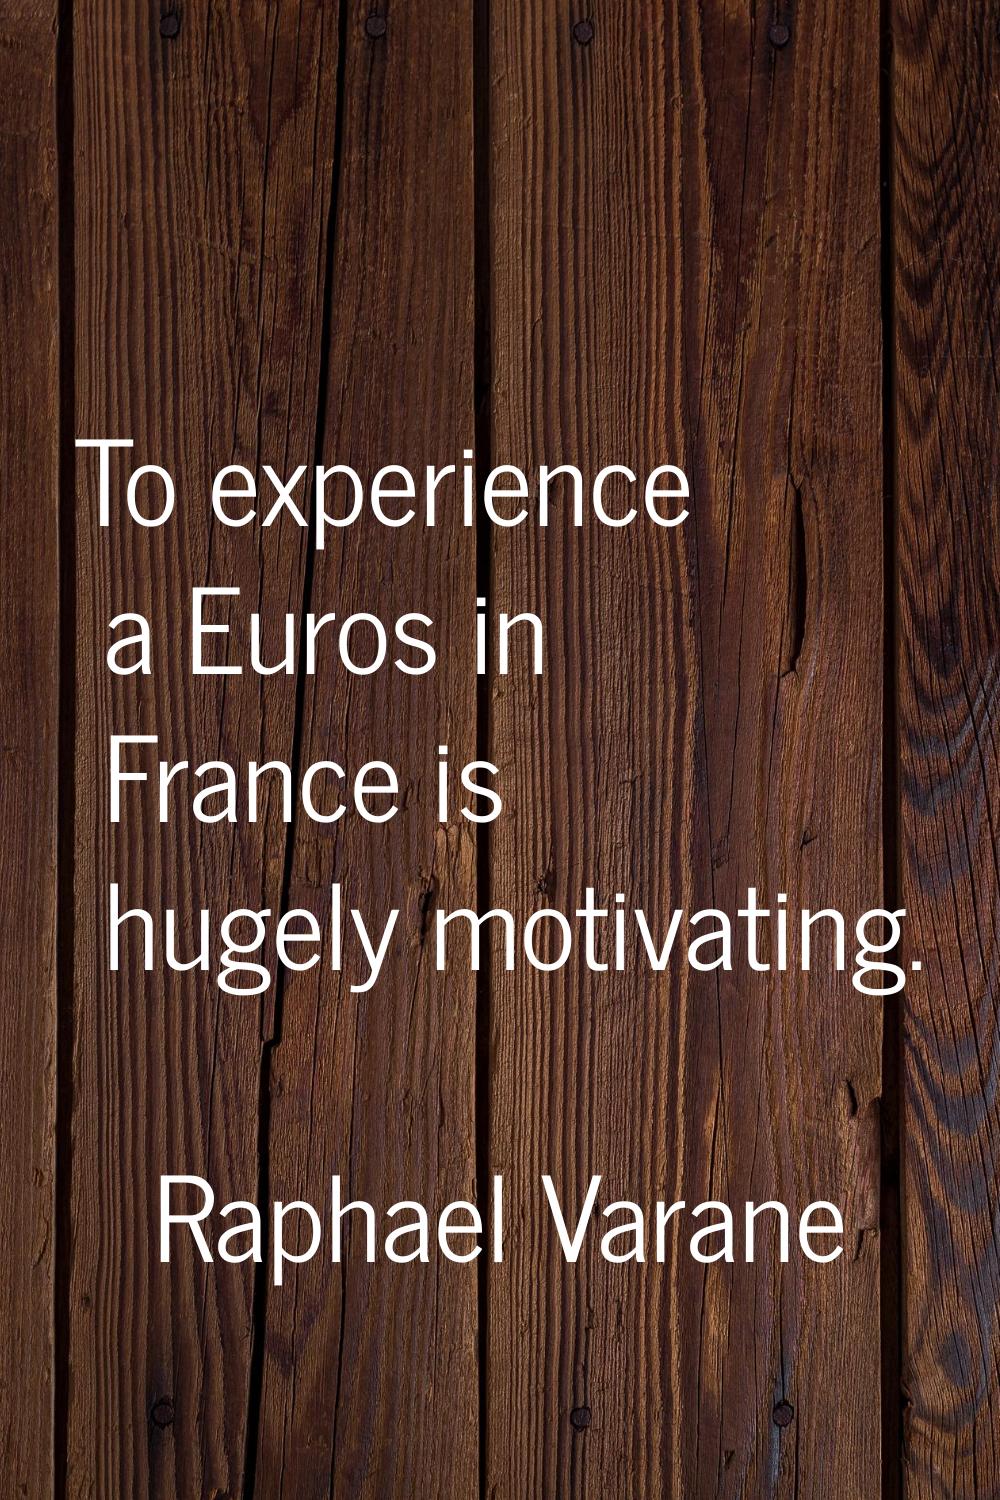 To experience a Euros in France is hugely motivating.